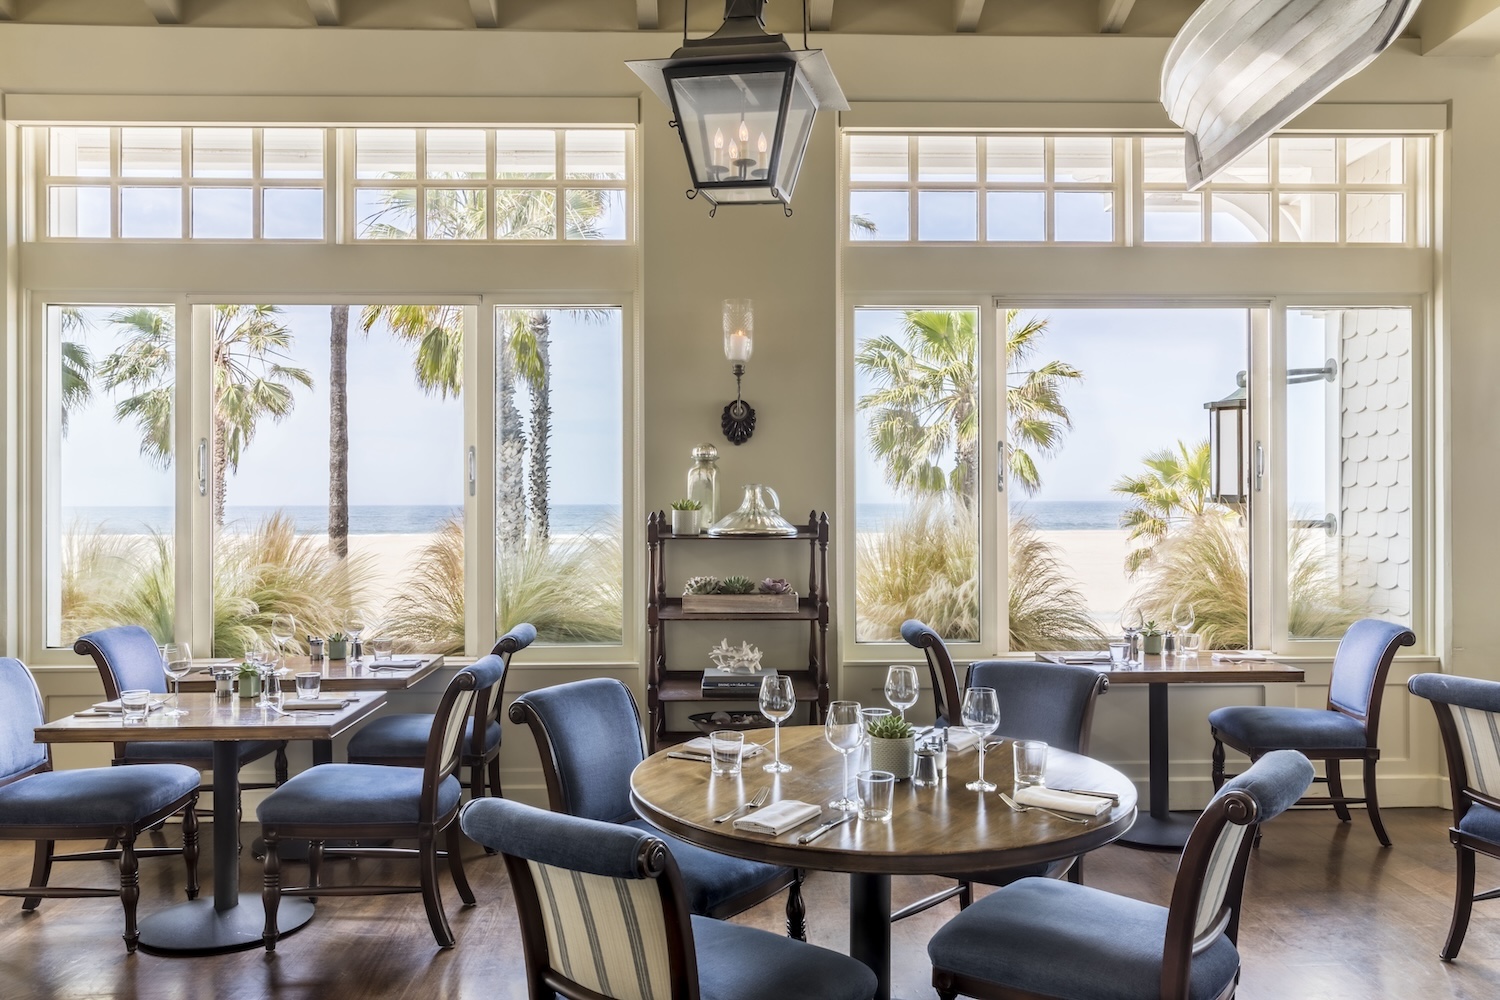 tables with glassware, blue chairs, windows facing beach and palm trees